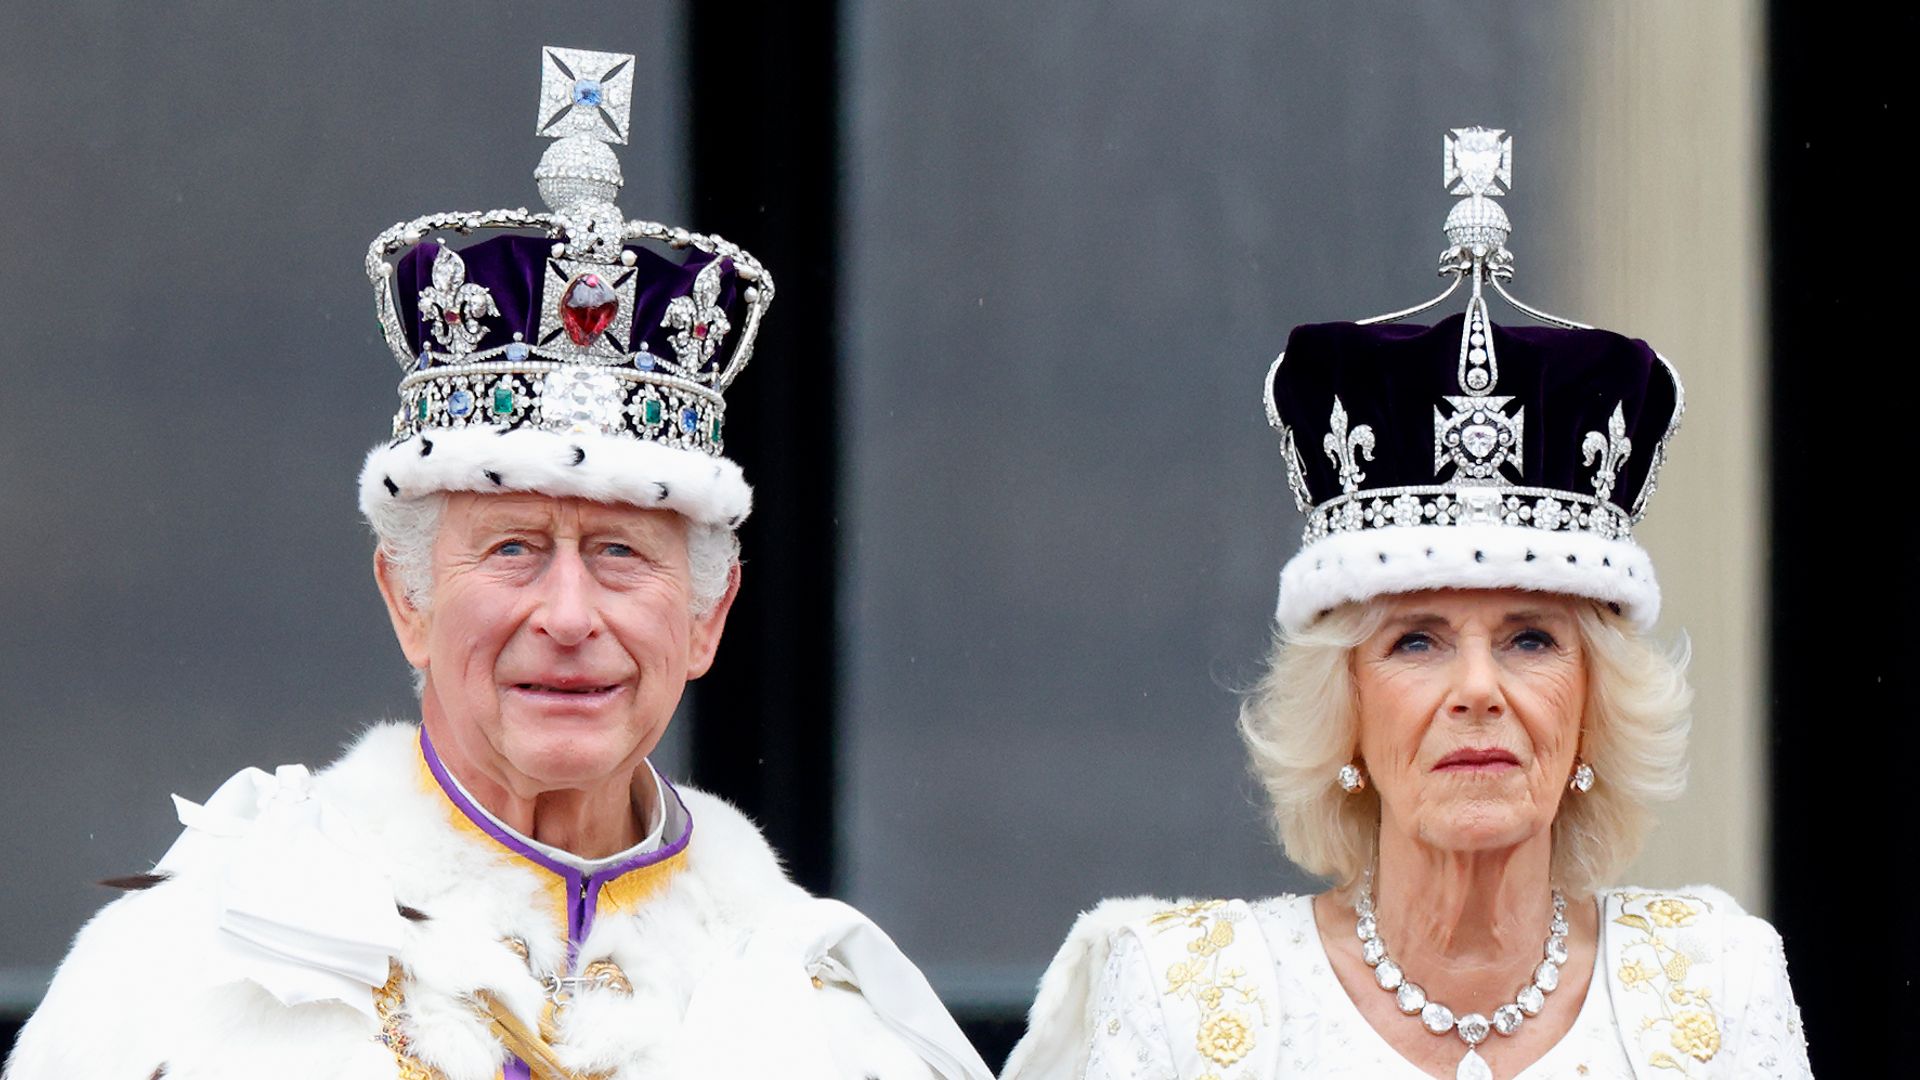 The King and Queen's coronation crowns are set to go on display